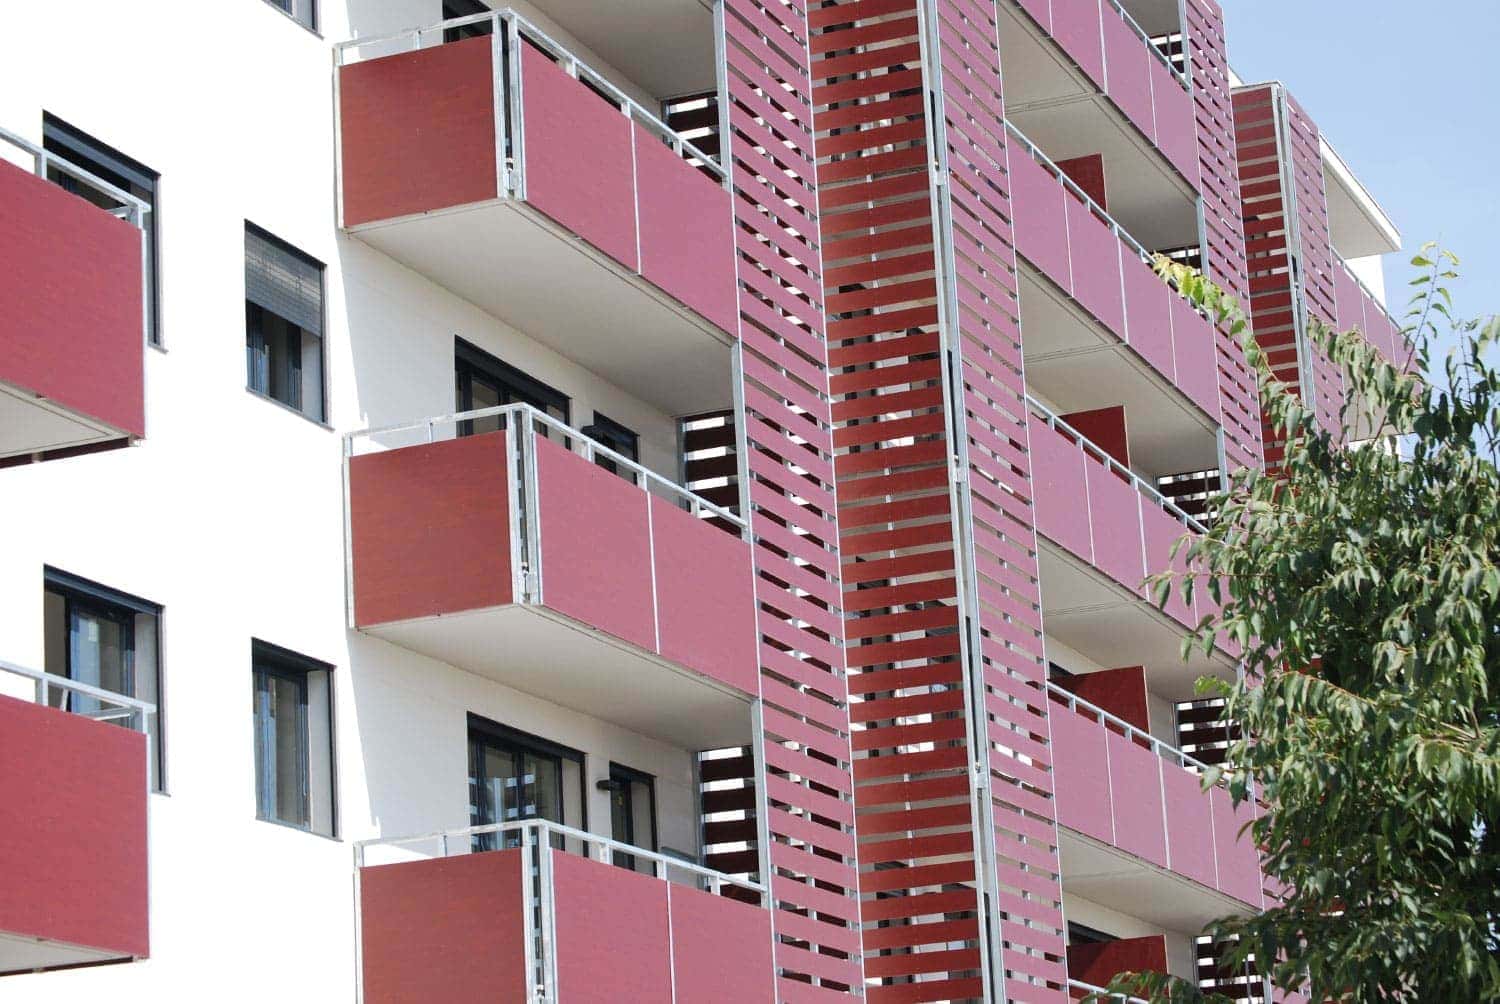 Balconies of a residential complex